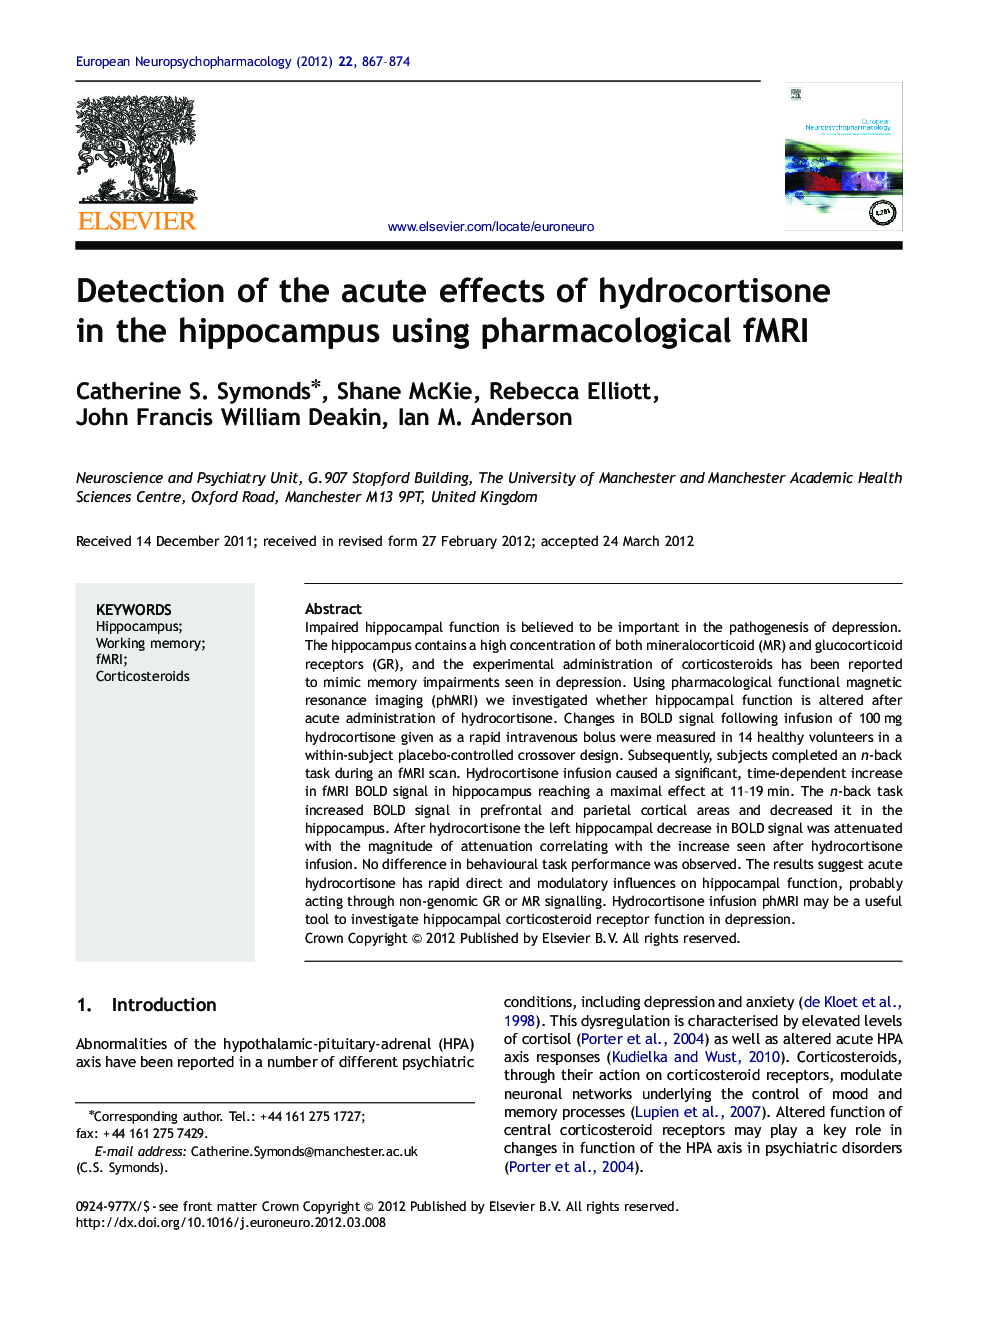 Detection of the acute effects of hydrocortisone in the hippocampus using pharmacological fMRI